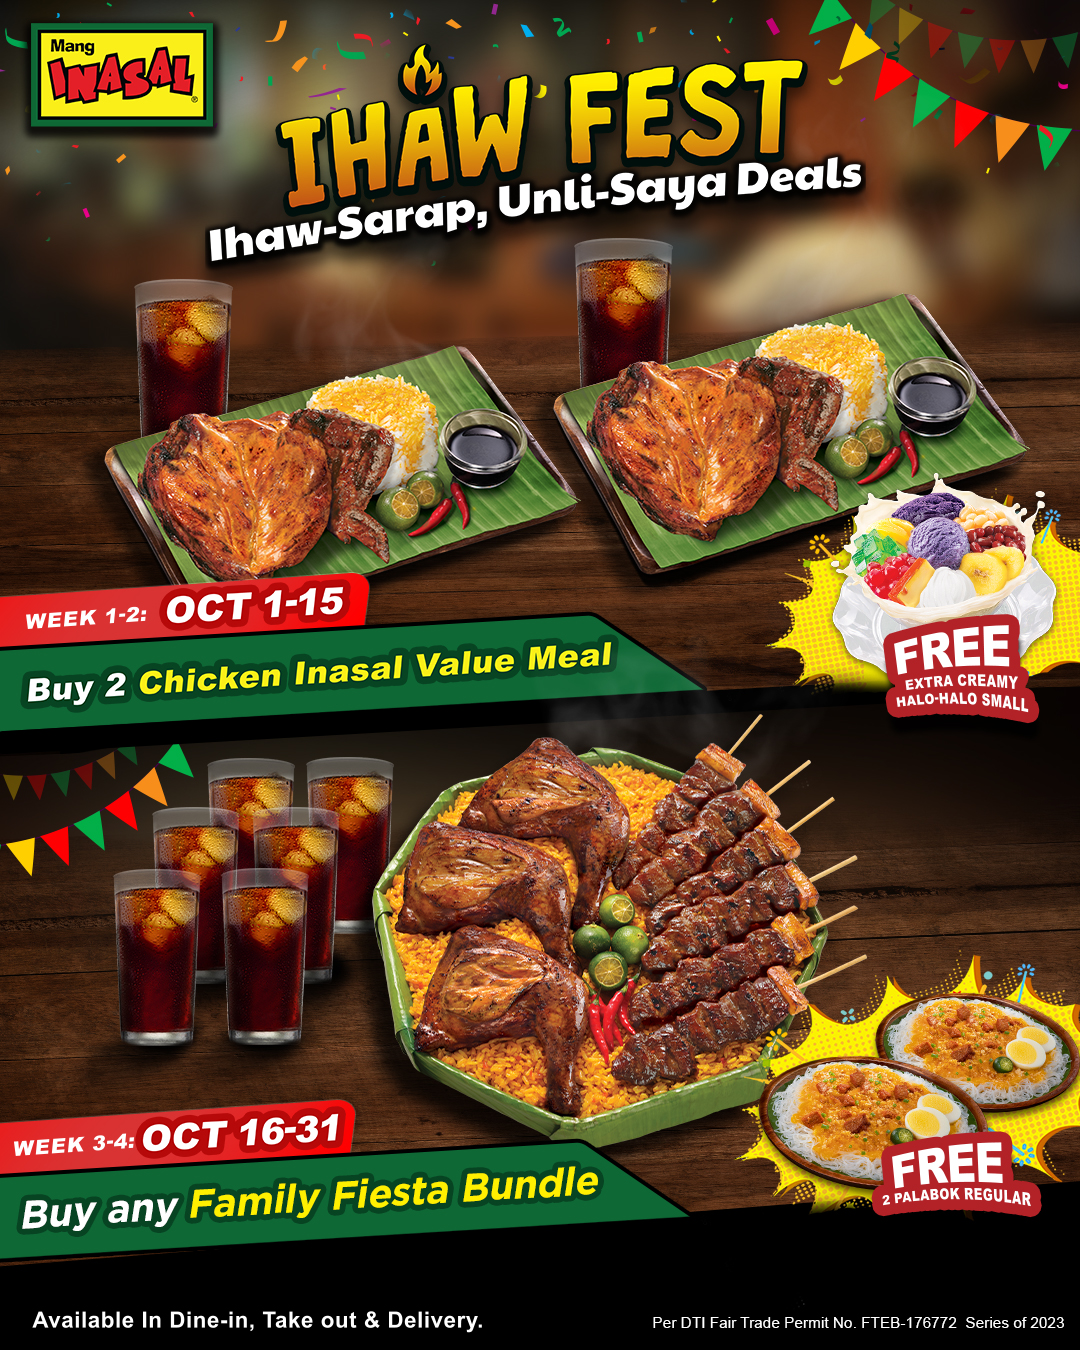 Mang Inasal celebrates nationwide Ihaw Fest this October